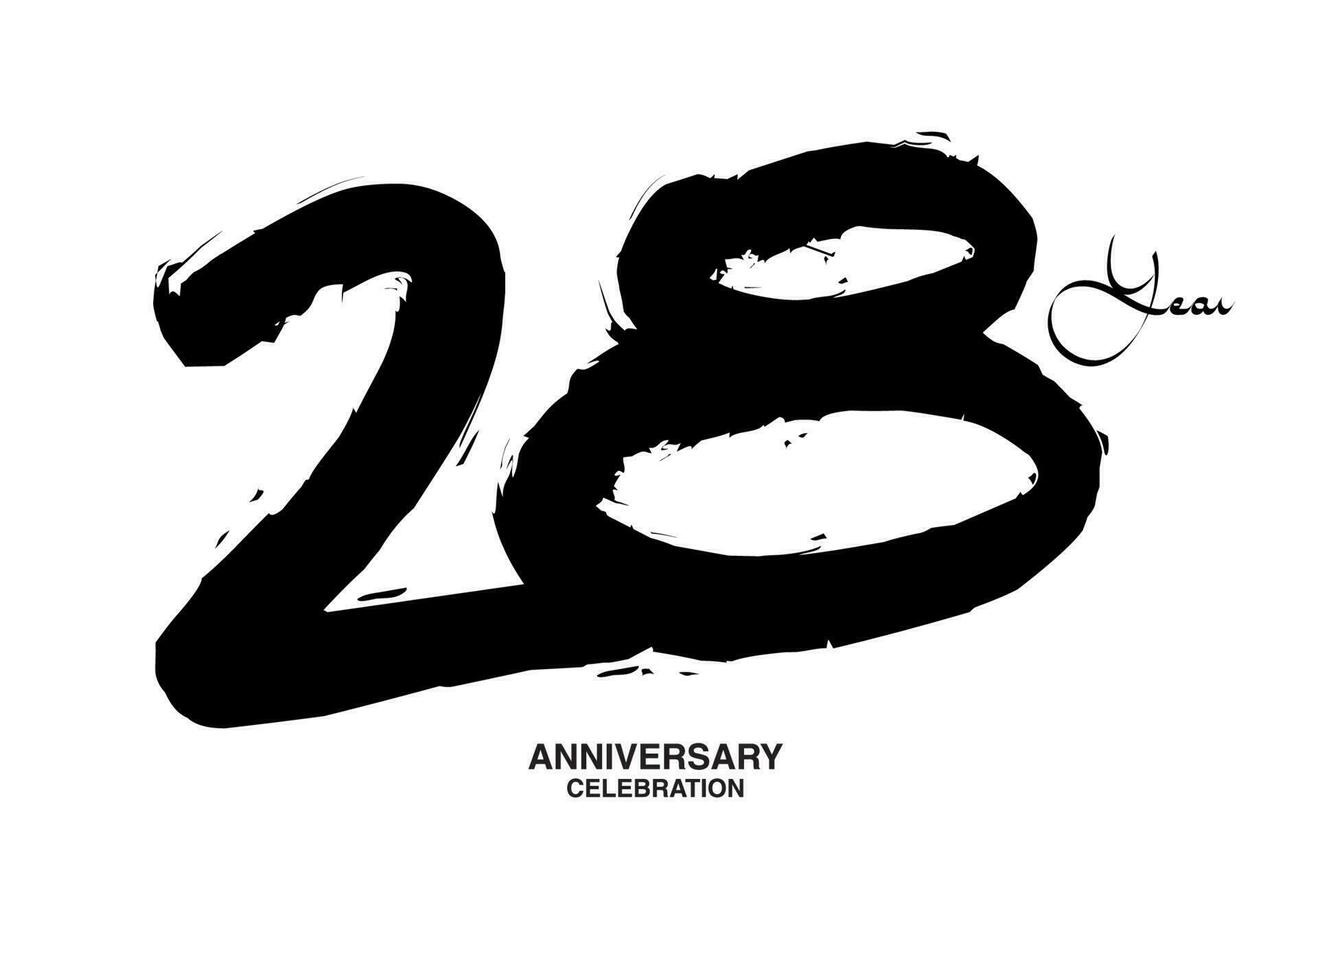 28 Years Anniversary Celebration Vector Template, 28 number logo design, 28th birthday, Black Lettering Numbers brush drawing hand drawn sketch, black number, Anniversary vector illustration